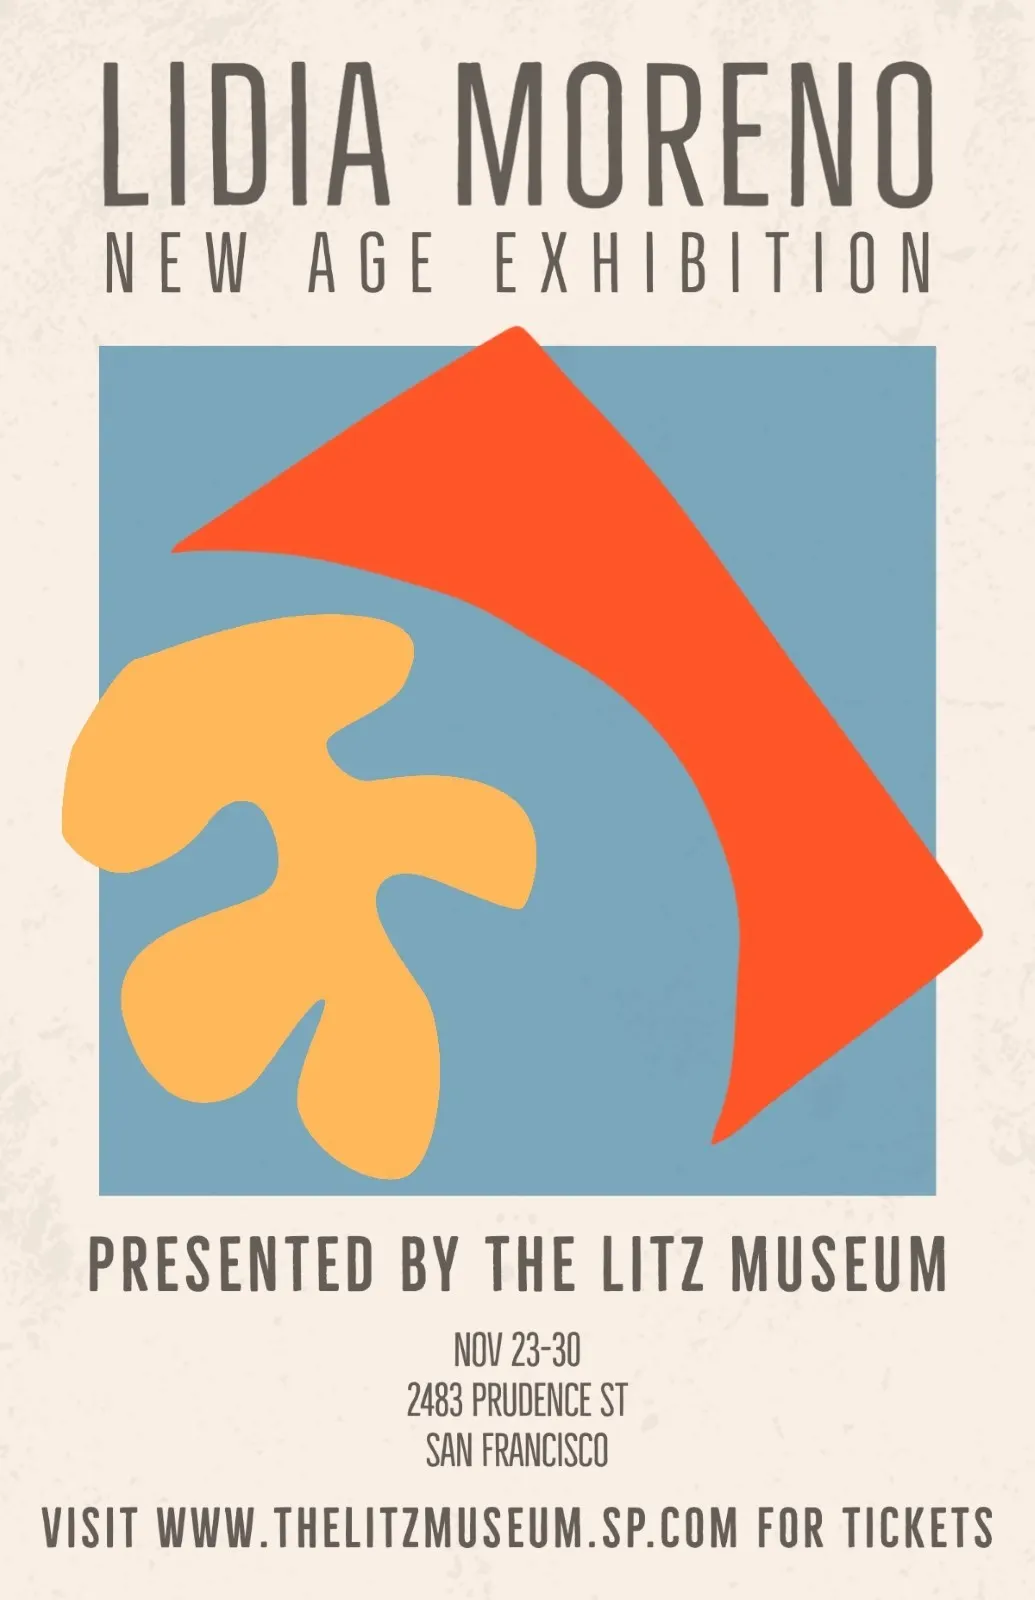 Colorful Art Museum Exhibition Poster